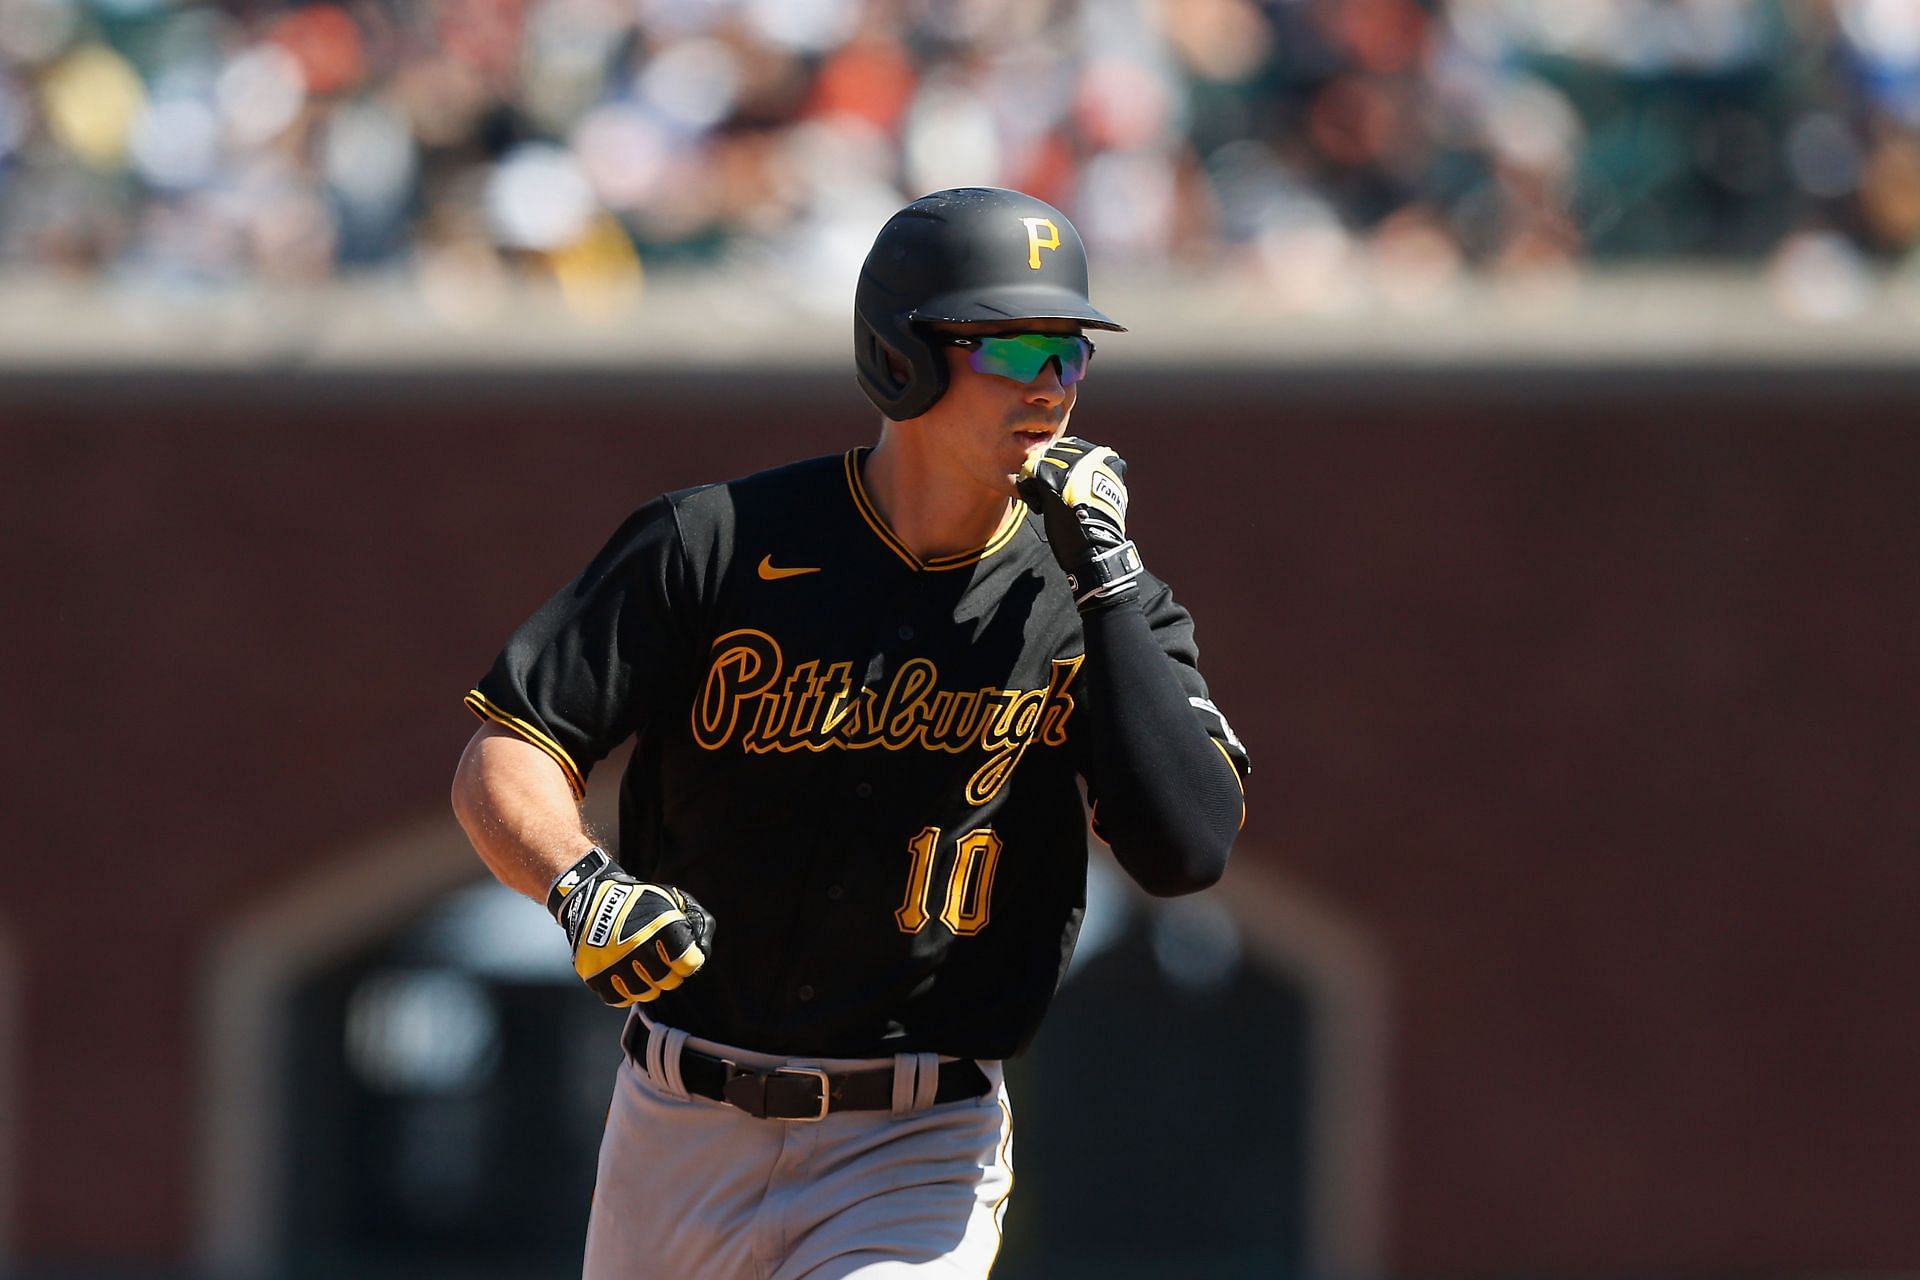 Bryan Reynolds of the Pittsburgh Pirates rounds the bases after hitting a three-run home run.